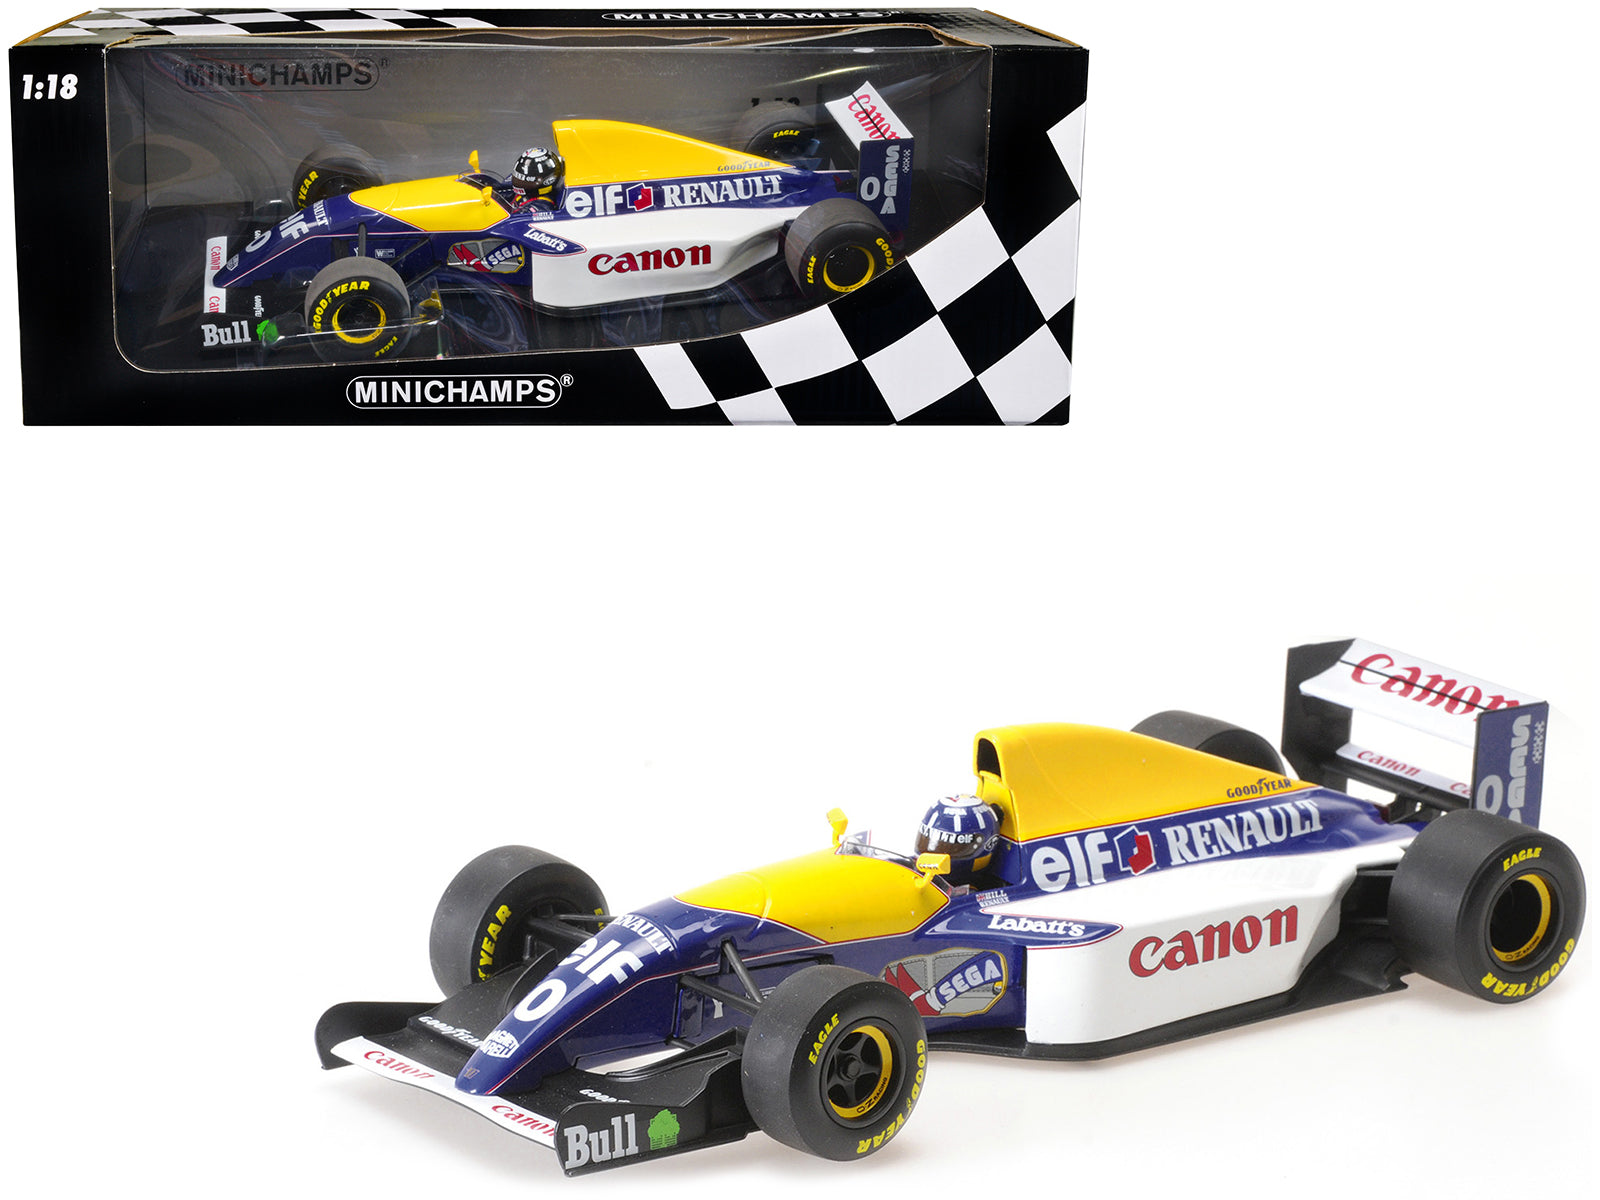 Williams Renault FW15C #0 Damon Hill "Canon" 3rd Place F1 Formula One World Championship (1993) with Driver Limited Edition to 300 pieces Worldwide 1/18 Diecast Model Car by Minichamps